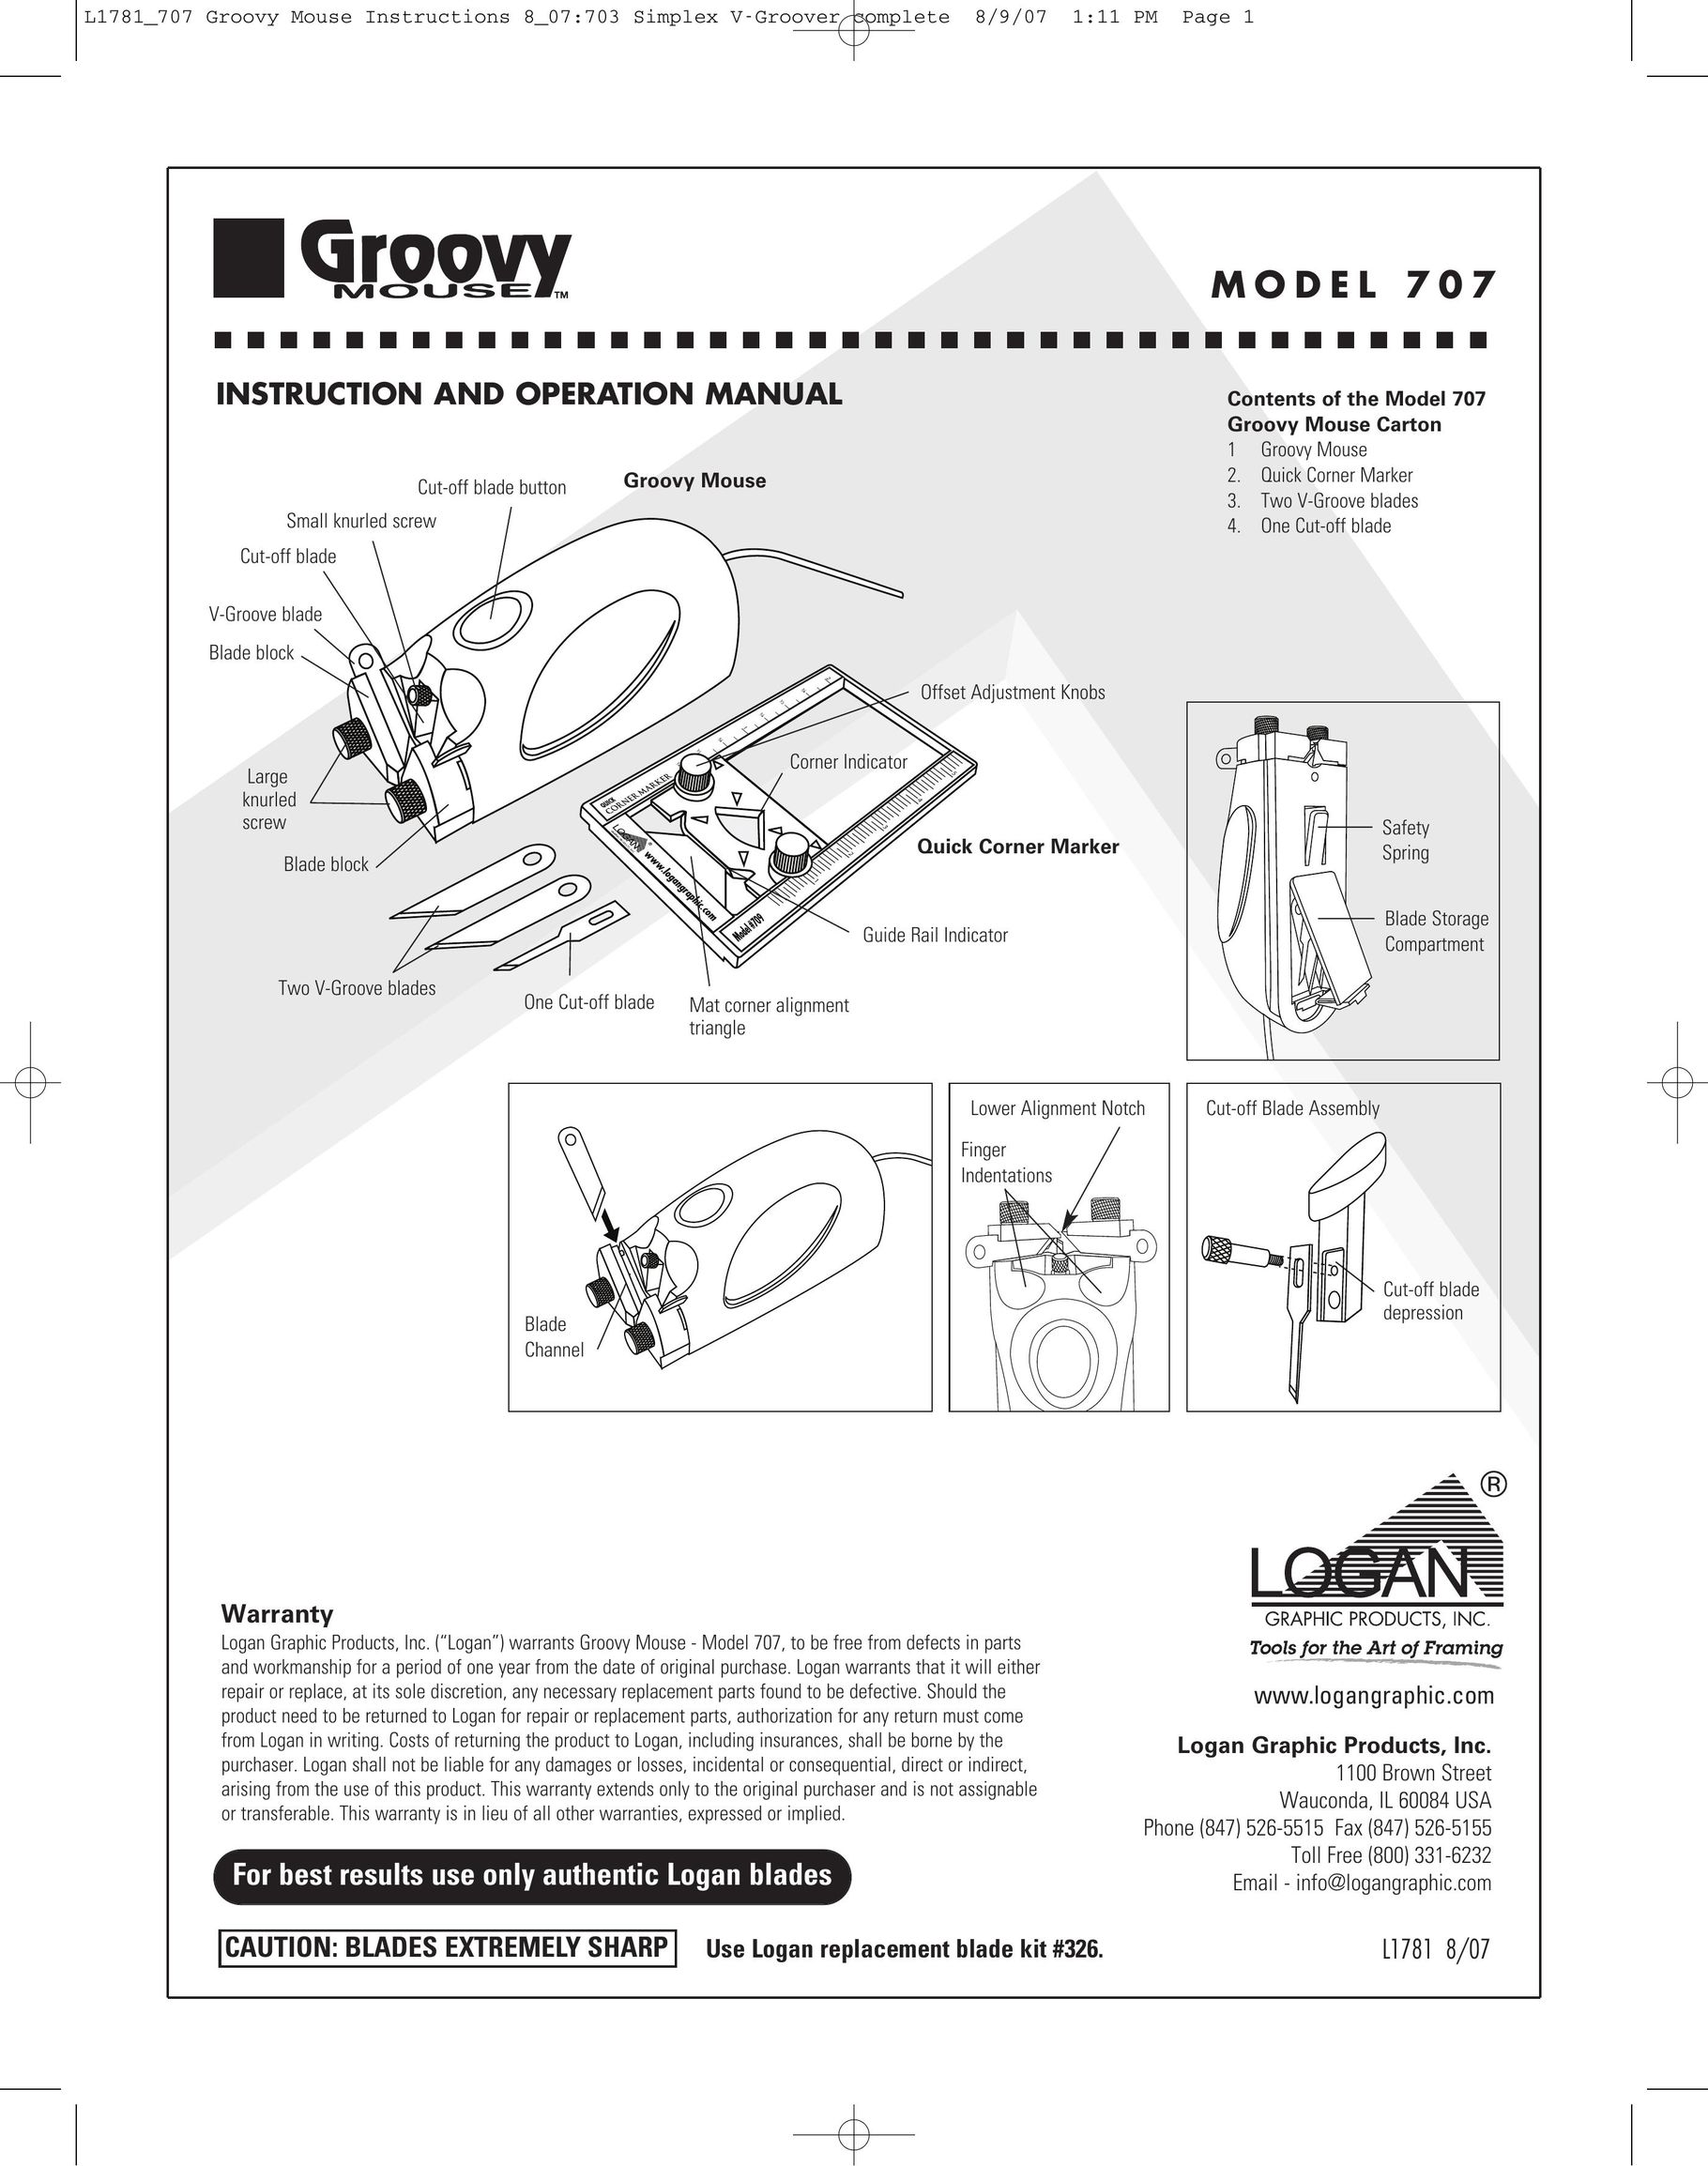 Logan Graphic Products 707 Mouse User Manual